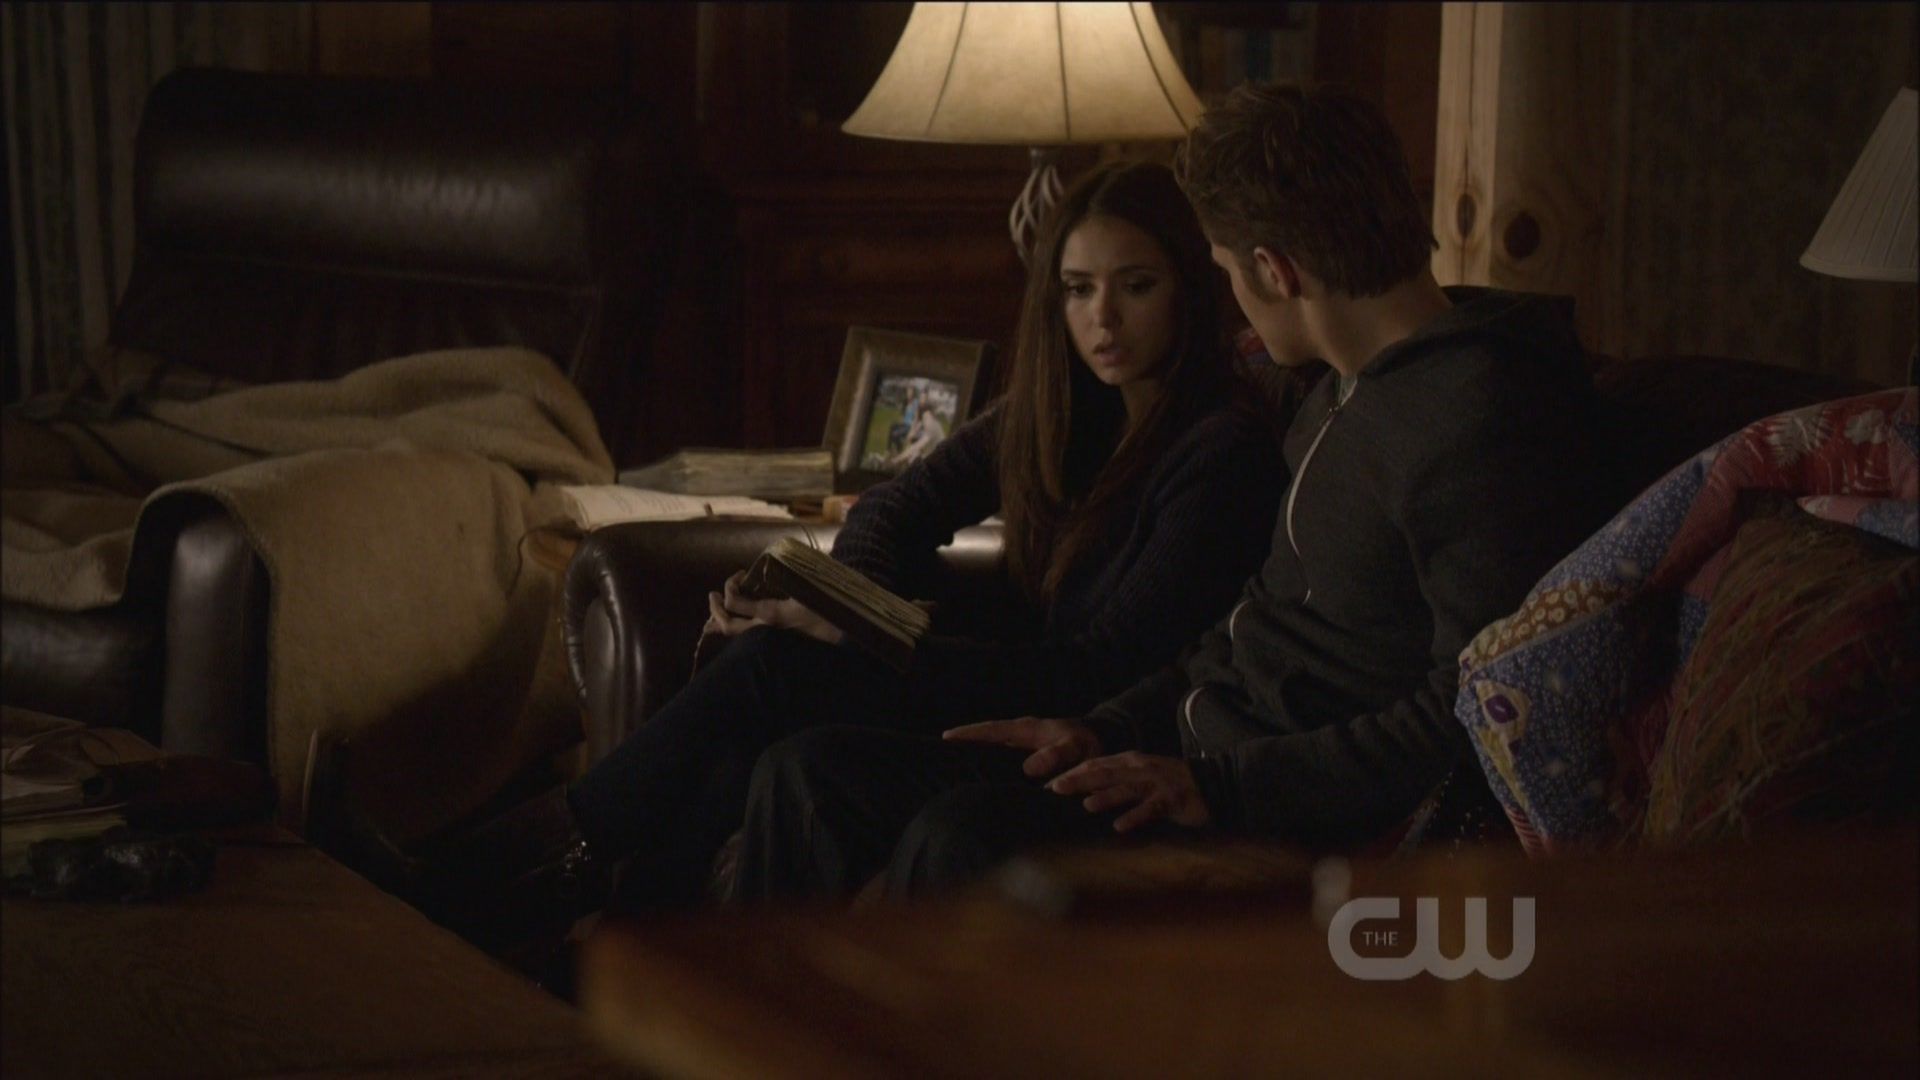 Stefan & Elena images The Dinner Party 2x15 Screencaps HD wallpaper and background photos